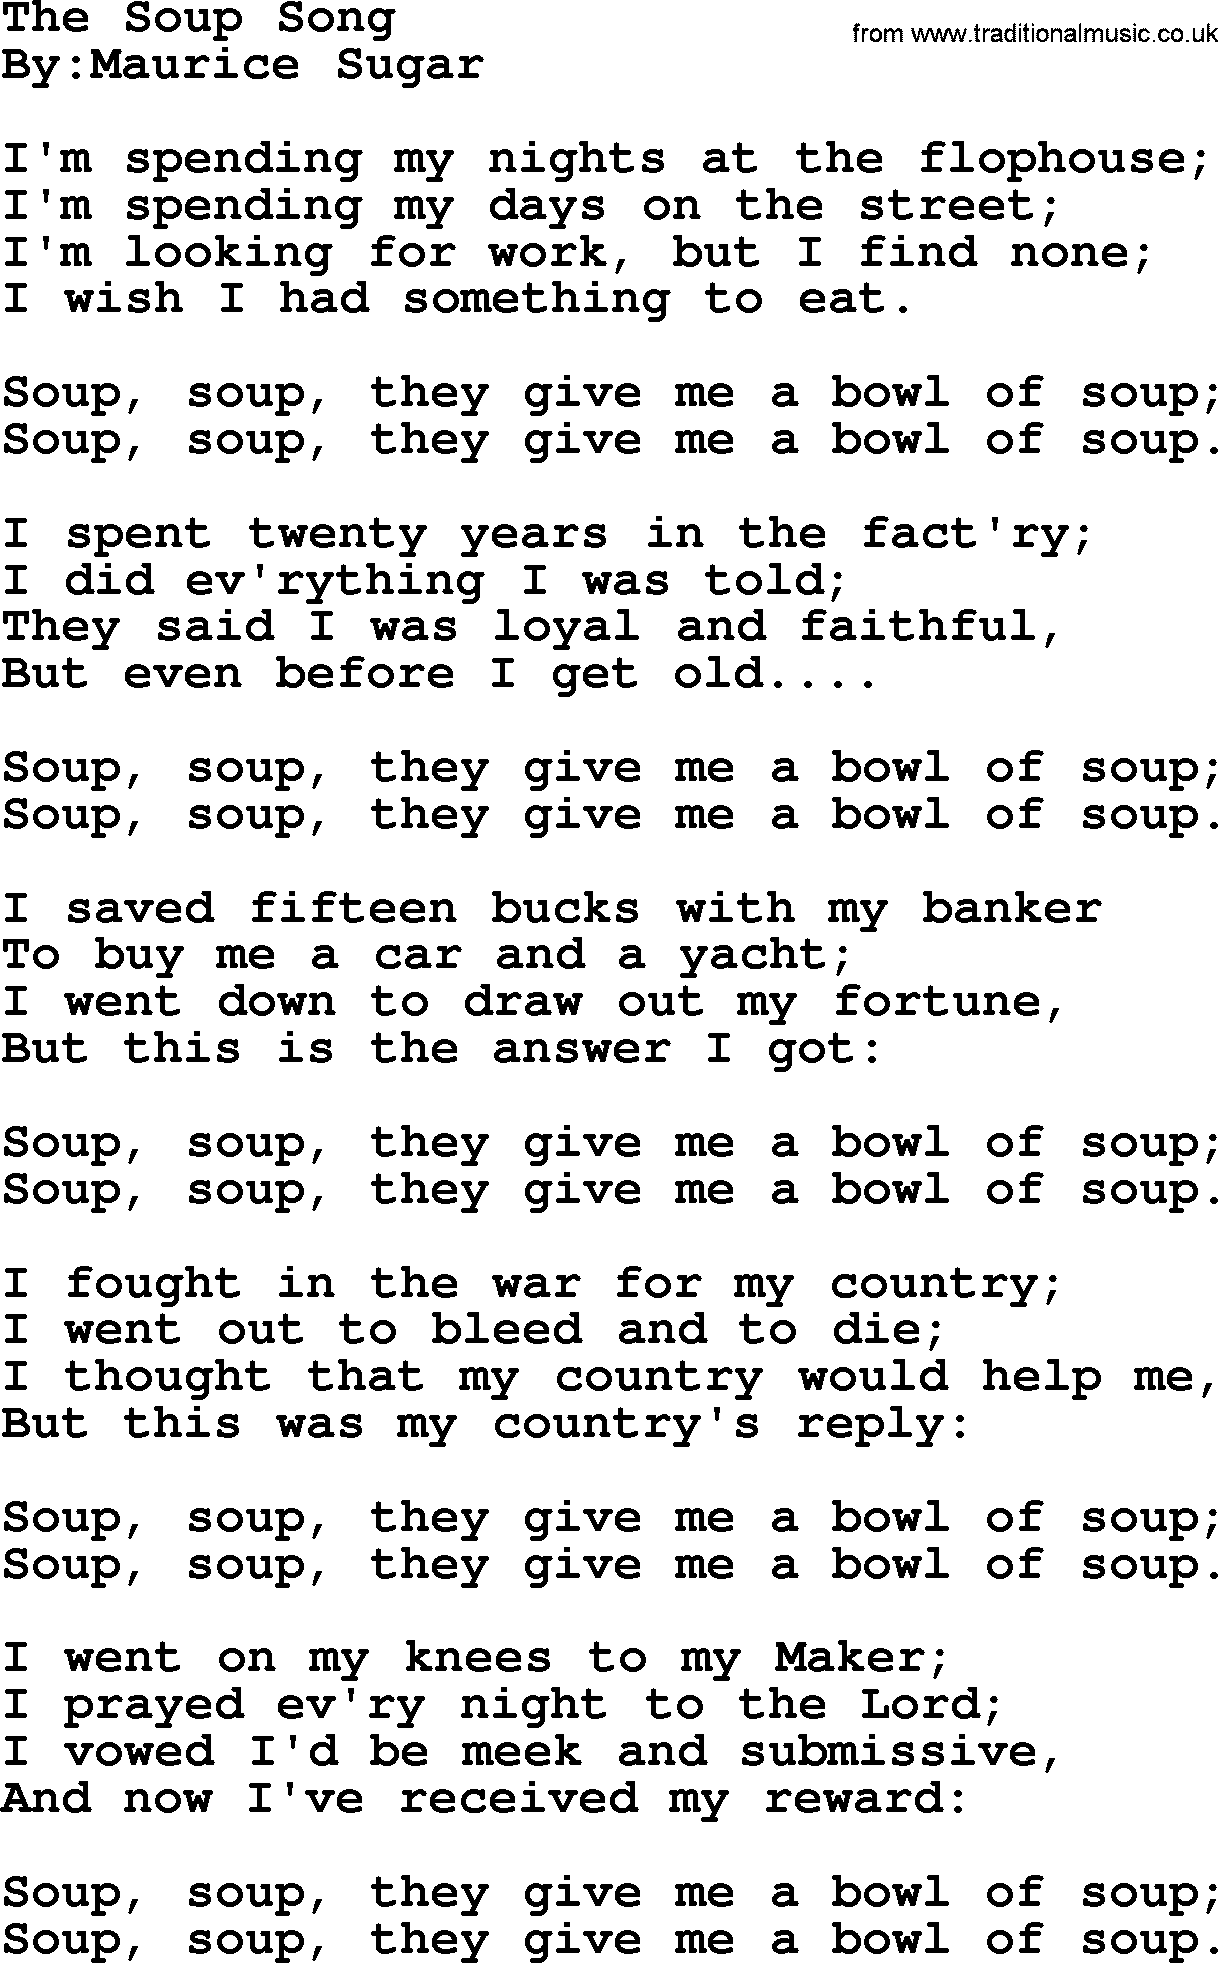 Political, Solidarity, Workers or Union song: The Soup Song, lyrics